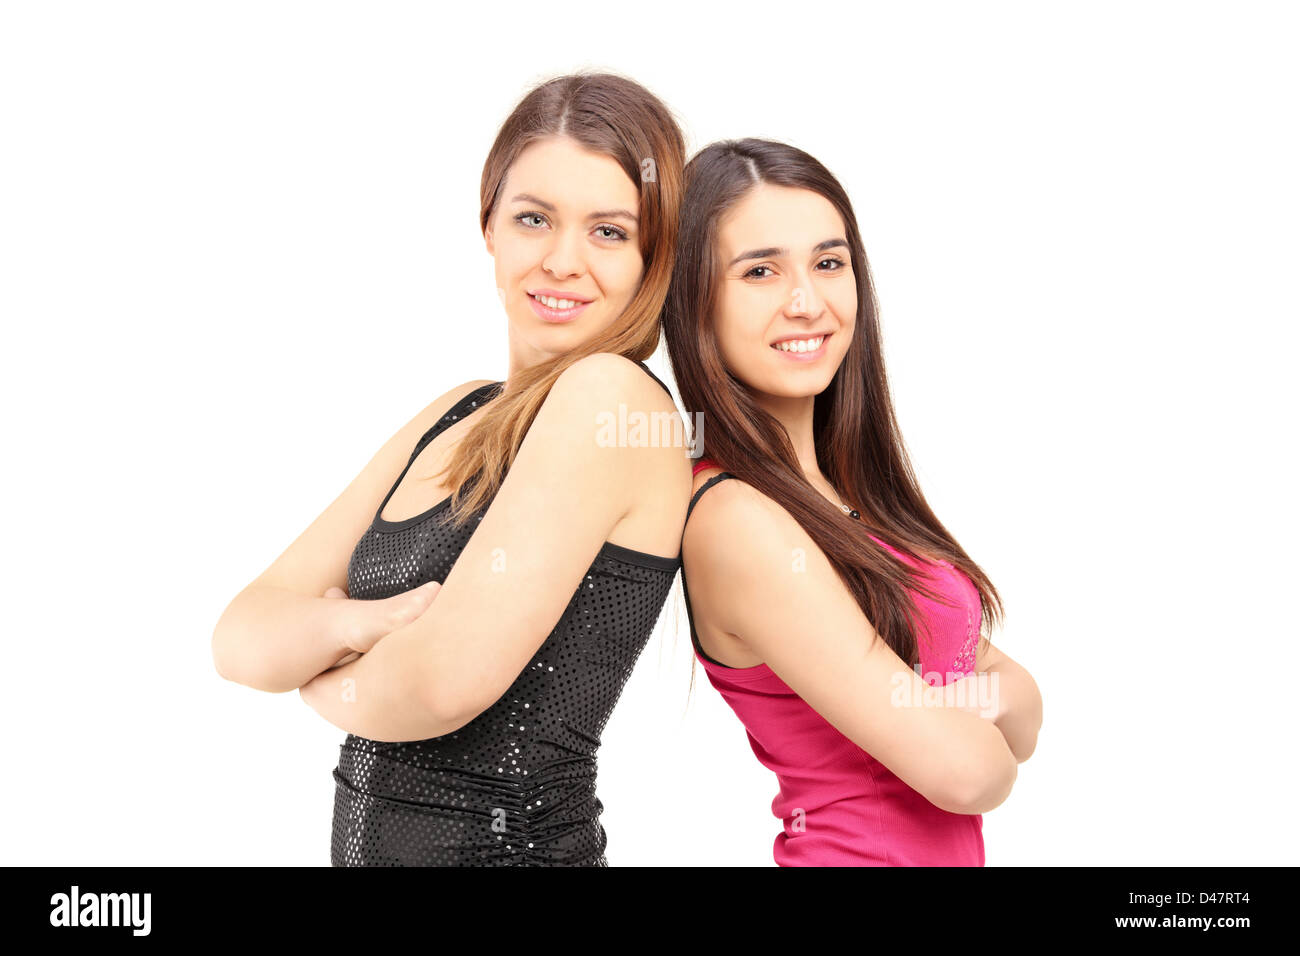 A smiling girlfriends standing close together and looking at camera isolated on white background Stock Photo